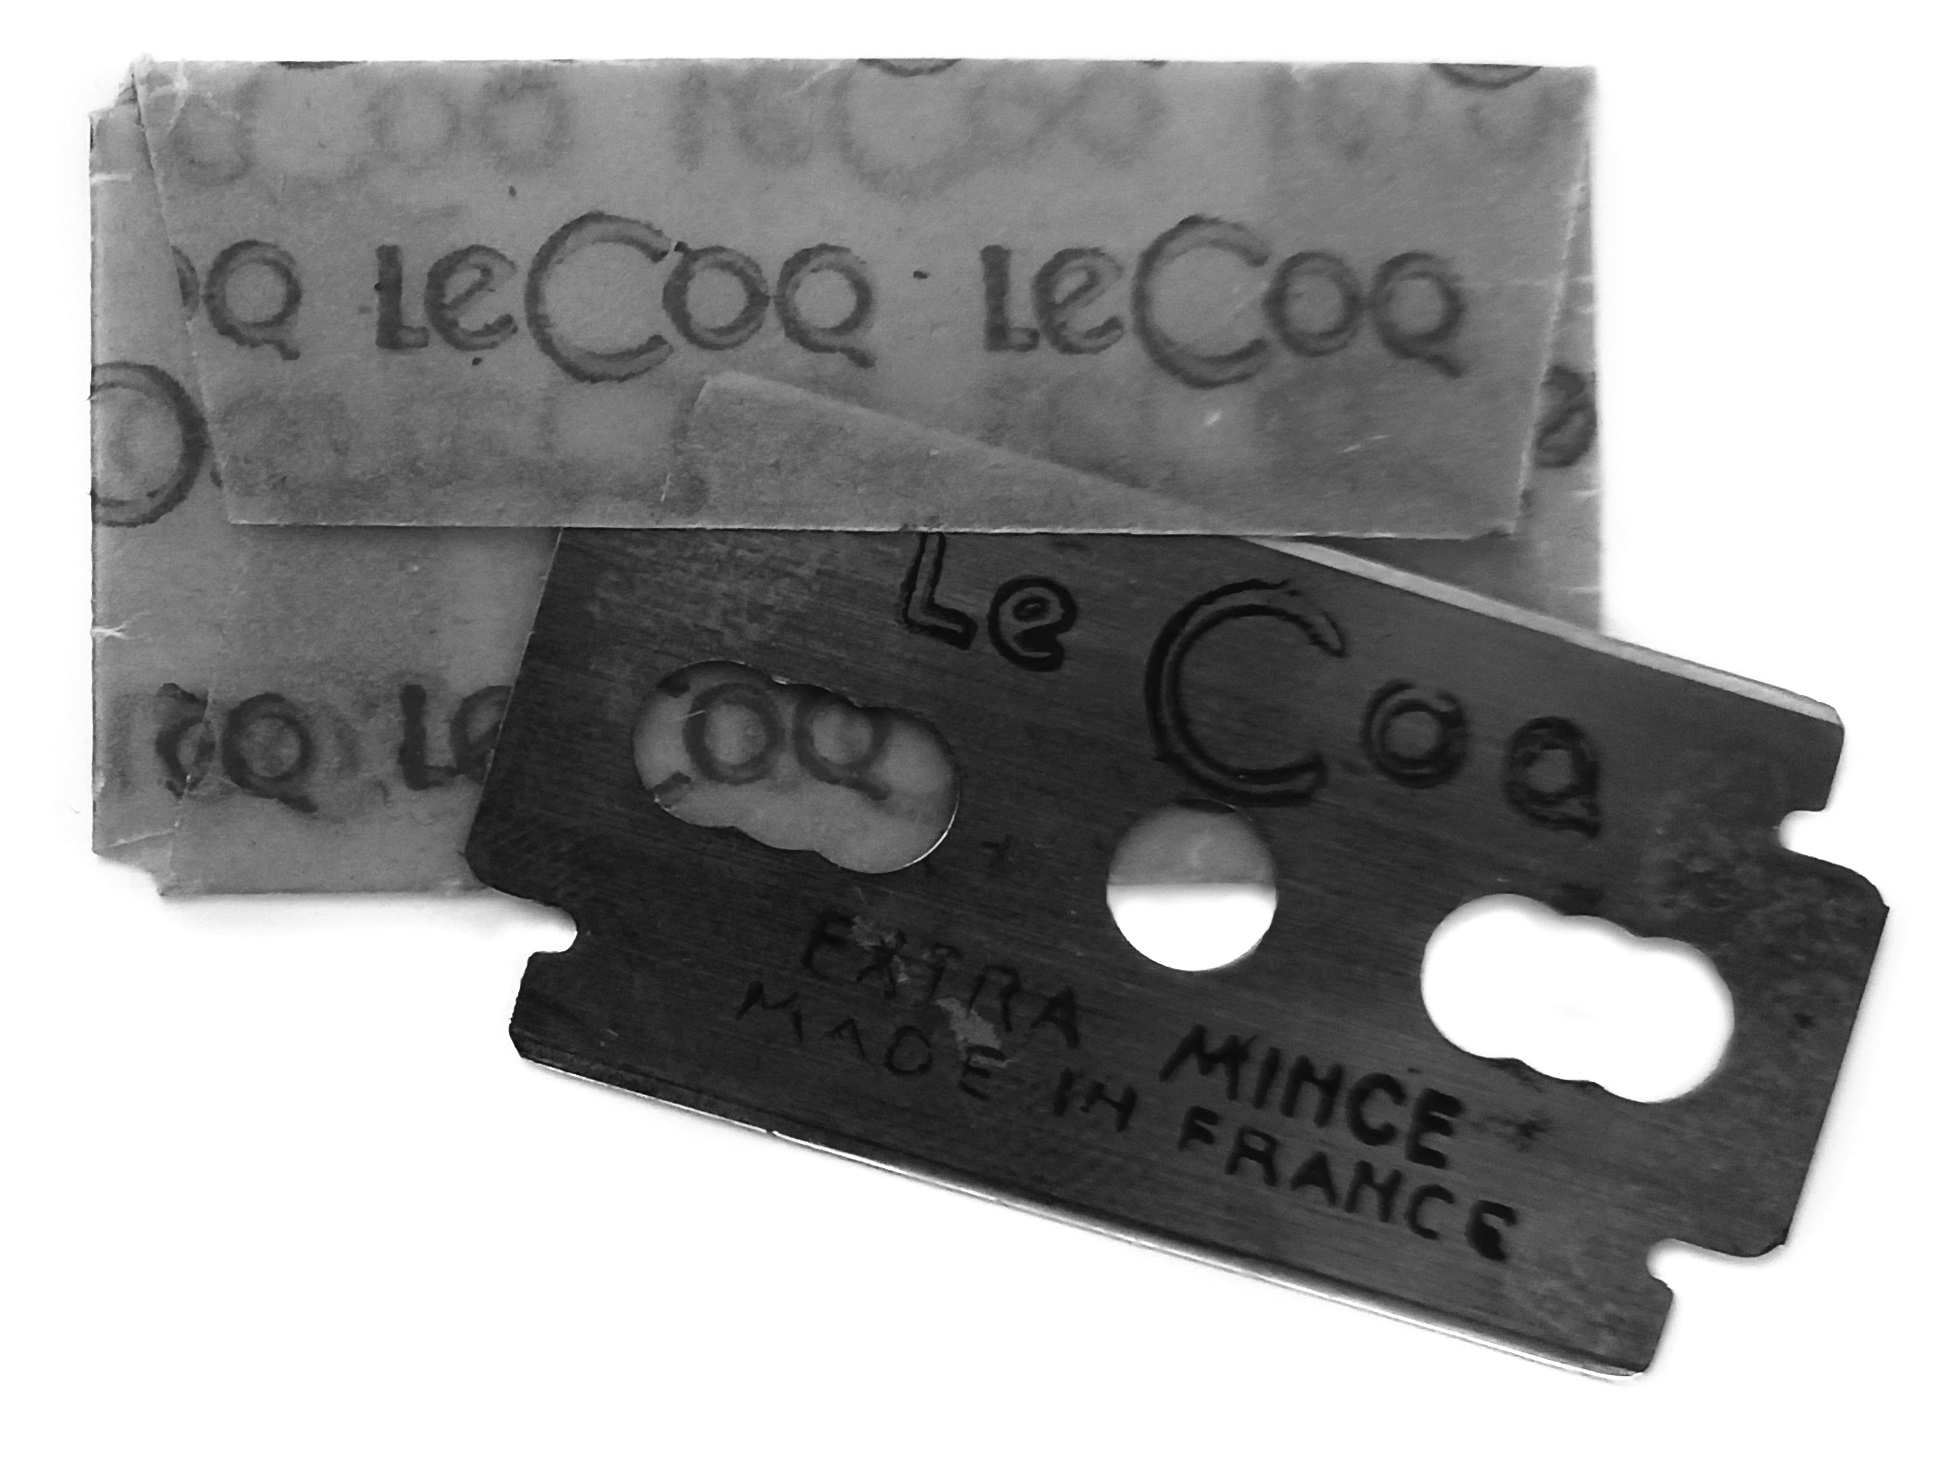 Extra-thin Le Coq razor blades made in France and bought in large quantities by Raymond.